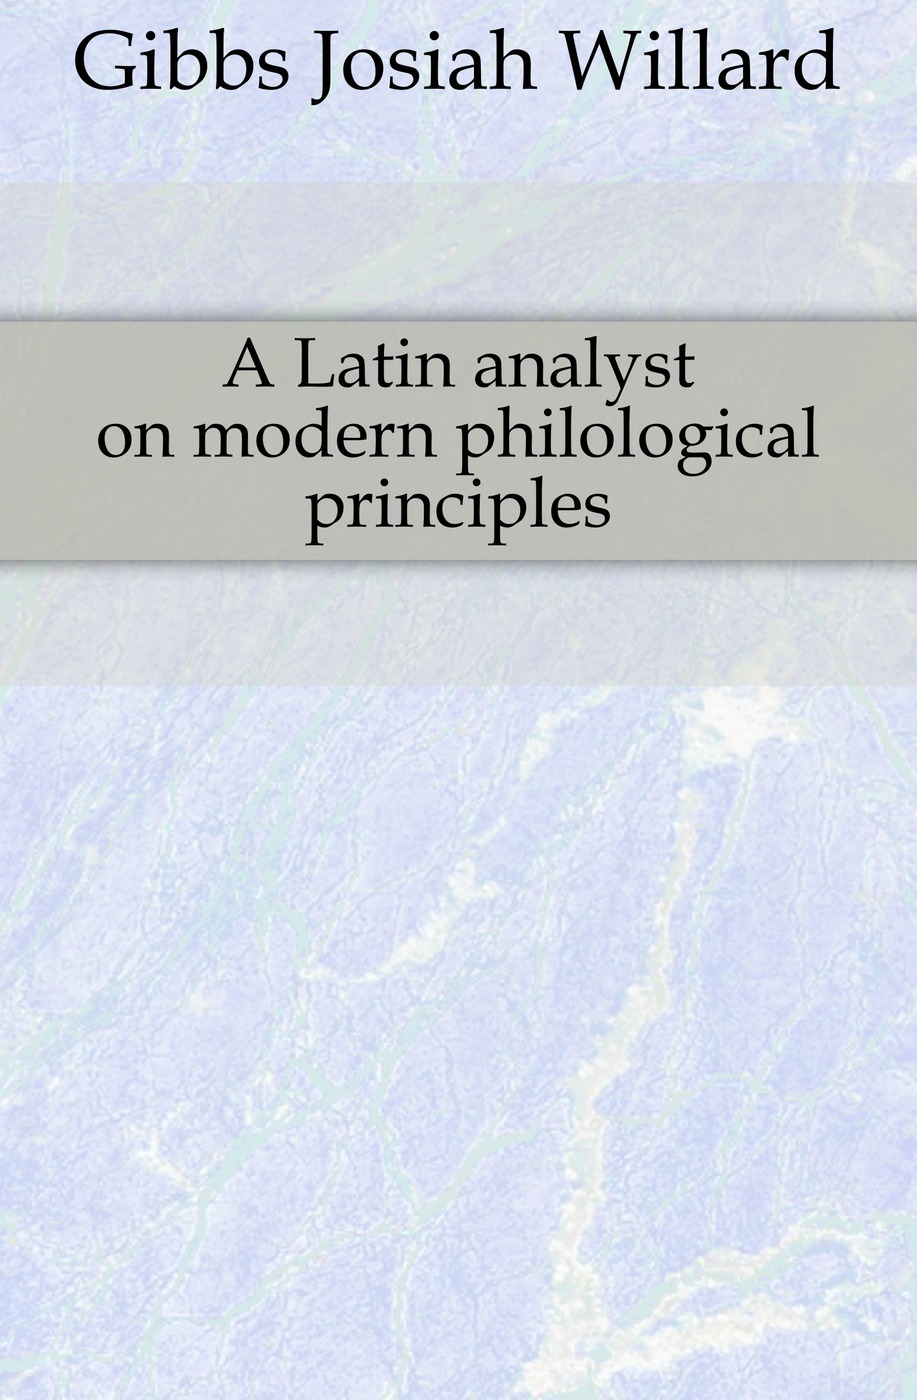 A Latin analyst on modern philological principles